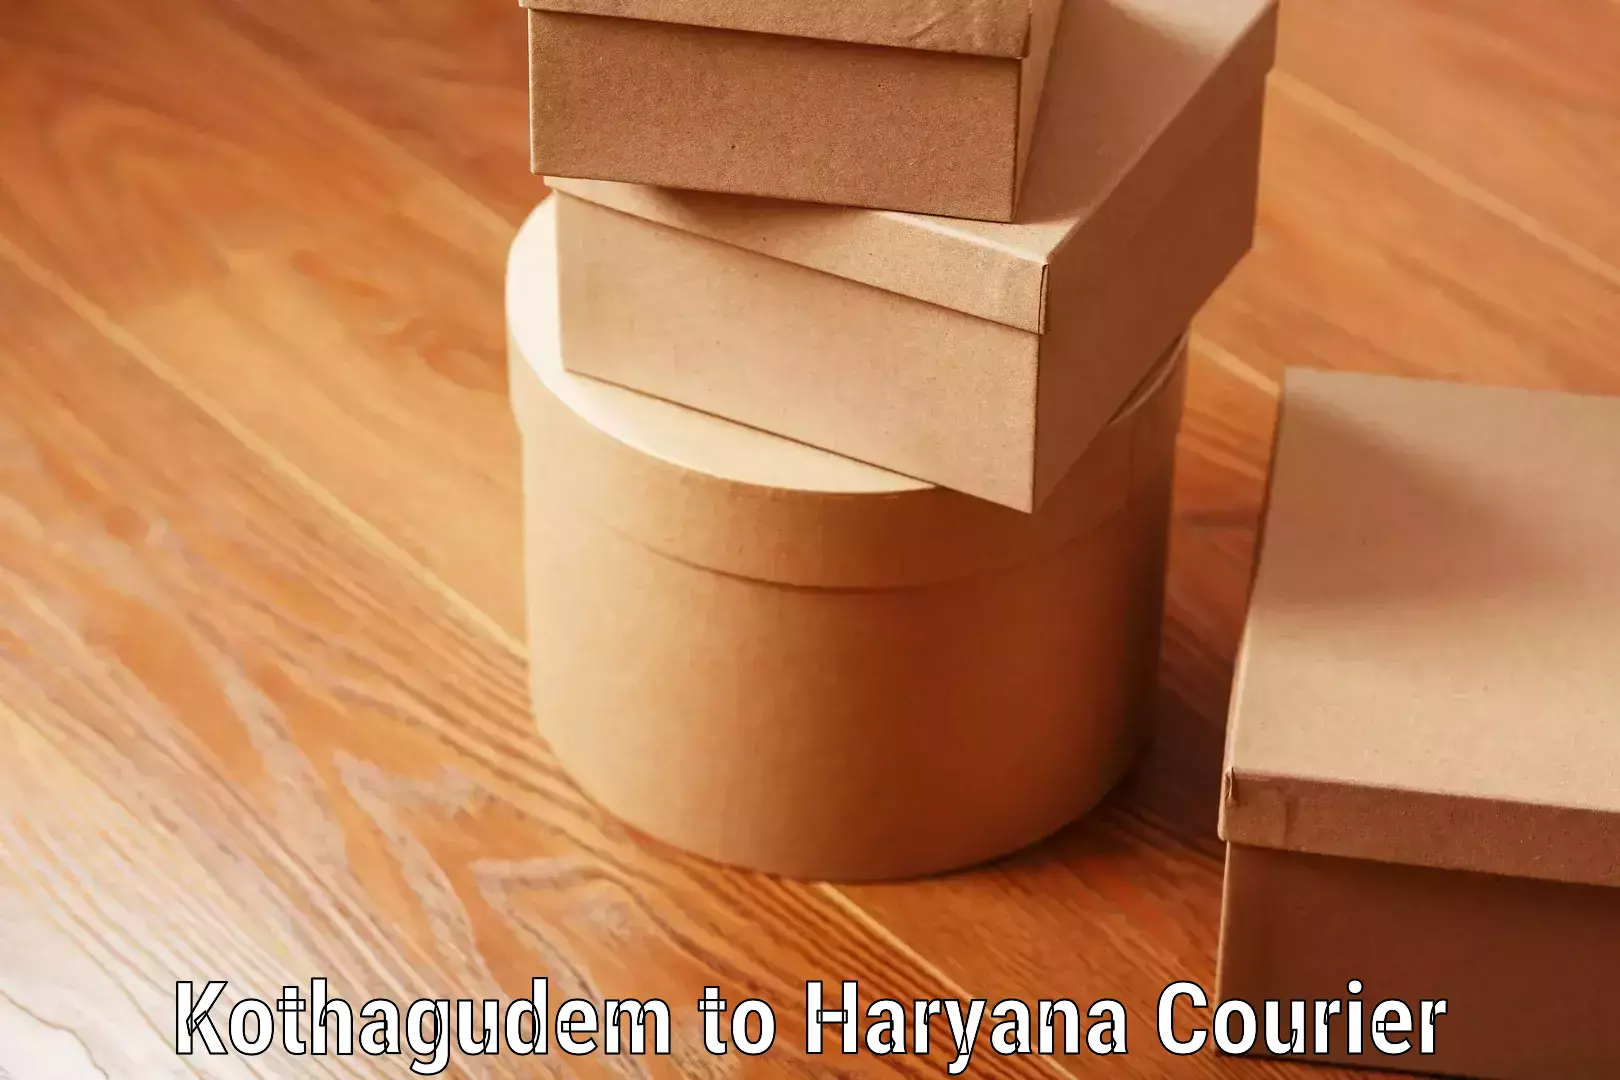 Personal effects shipping in Kothagudem to Haryana